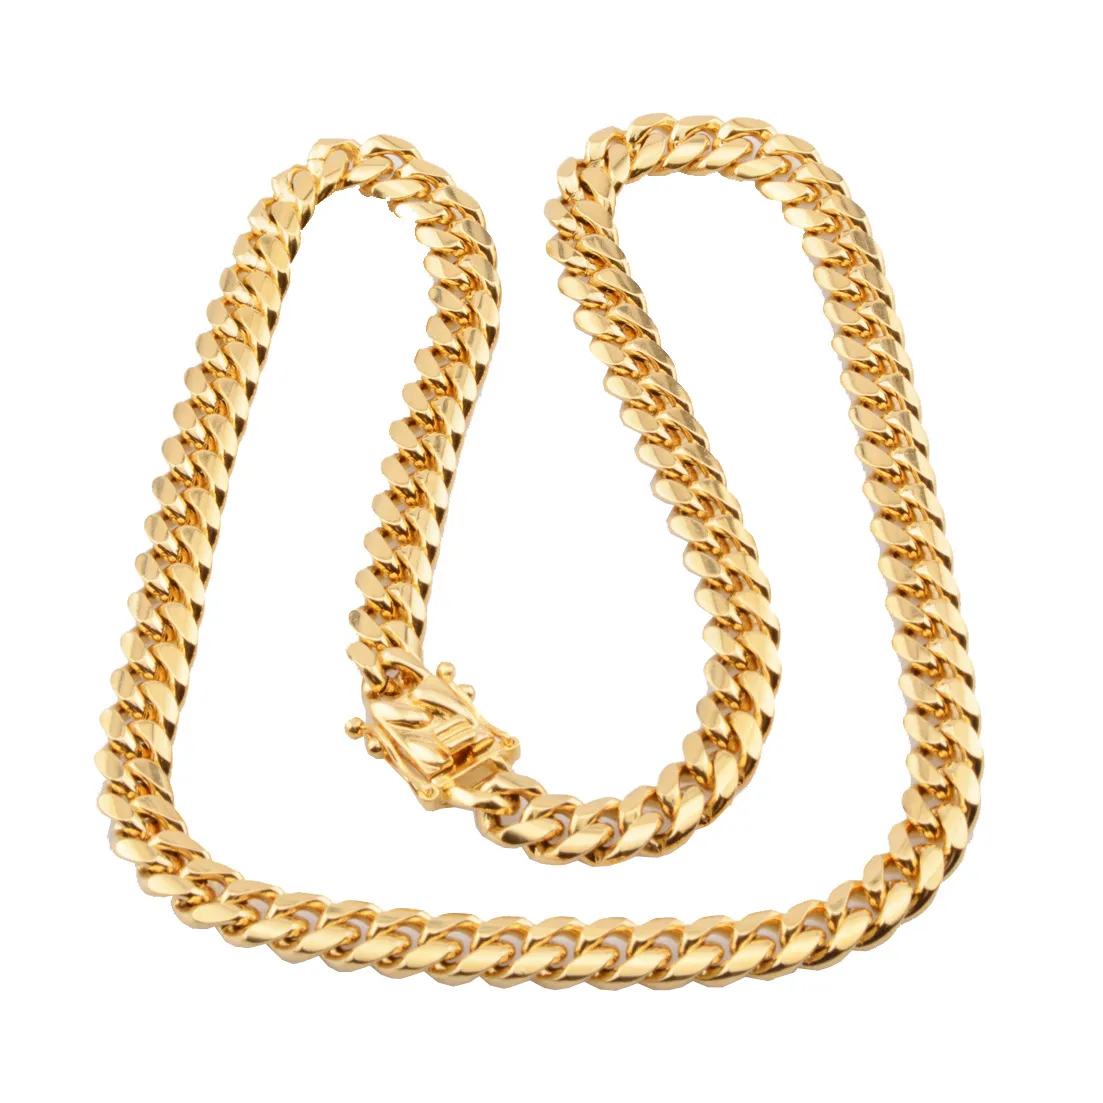 8mm/10mm/12mm/14mm/16mm  Cuban Link Chains Stainless Steel Mens 14K Gold Chains High Polished Punk Curb Necklaces